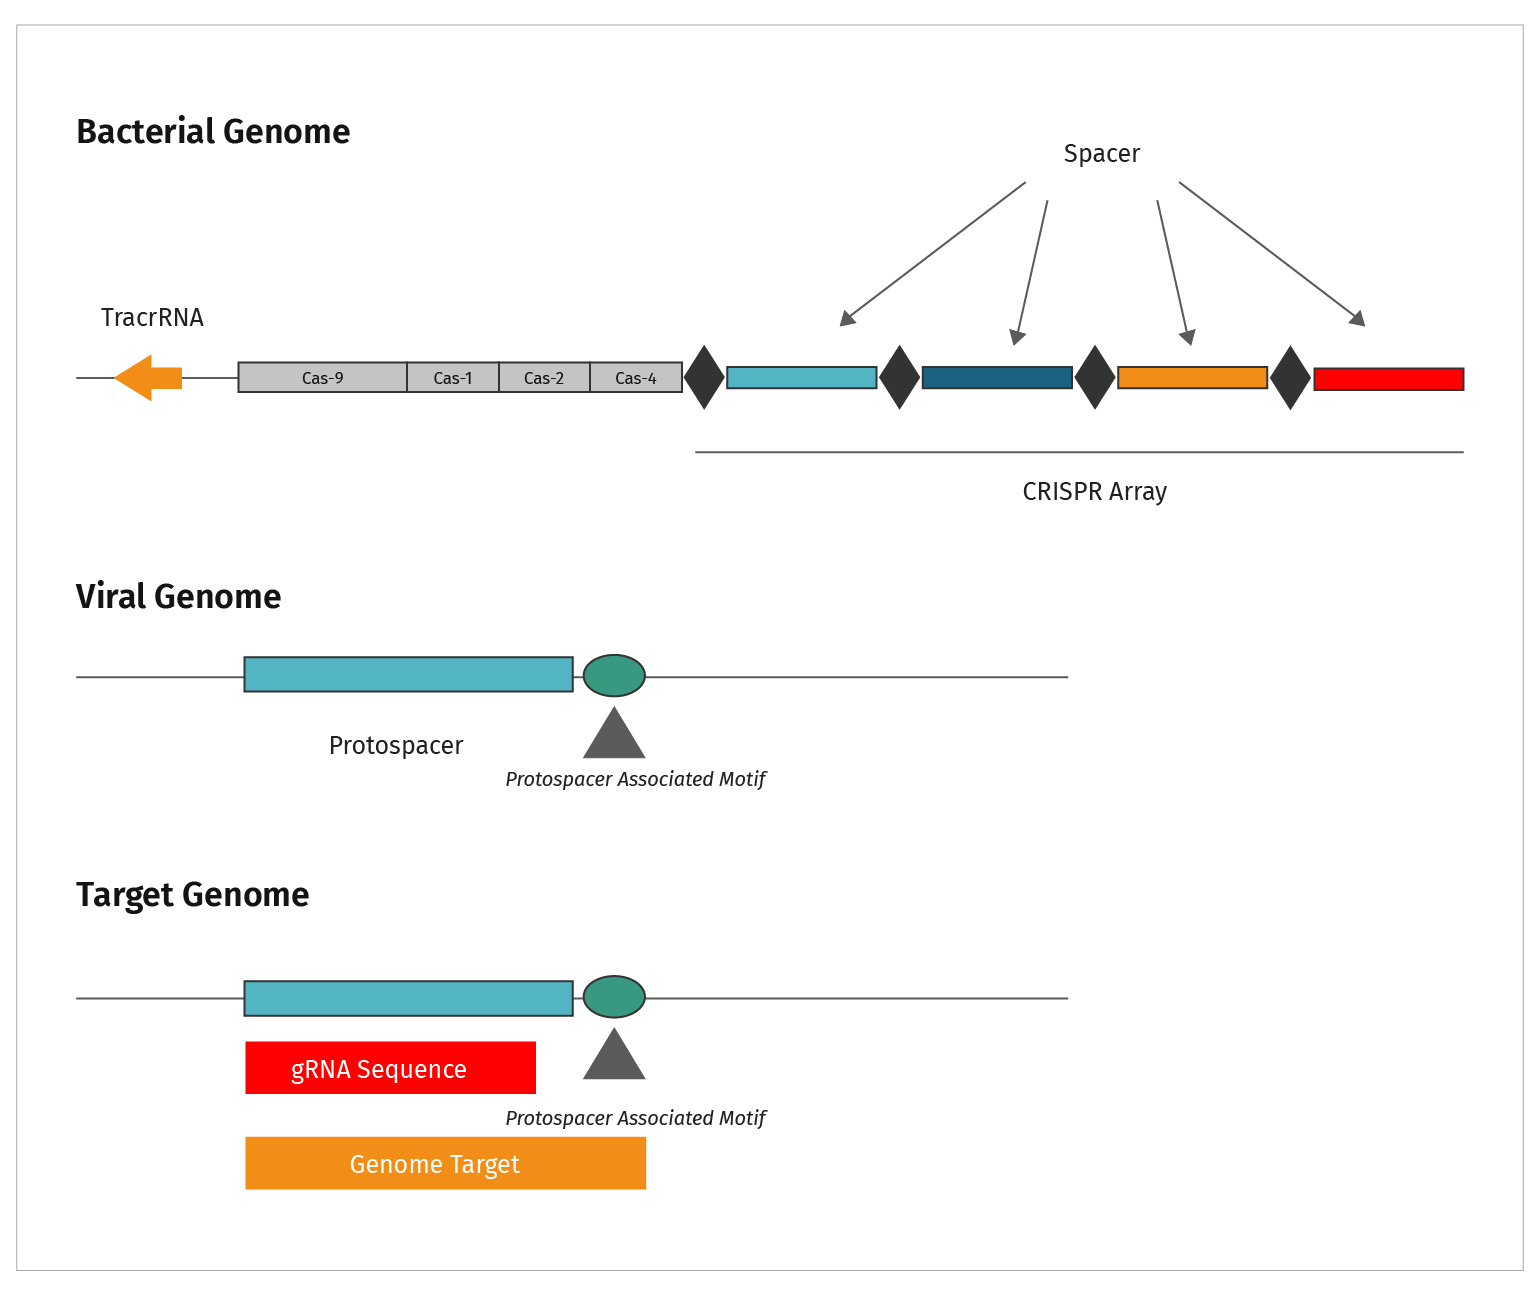 Figure 8: Diagram showing relationship of bacterial genome, to viral genome that must be defended against by CRISPR  and target genome that will be edited by CRIPSR